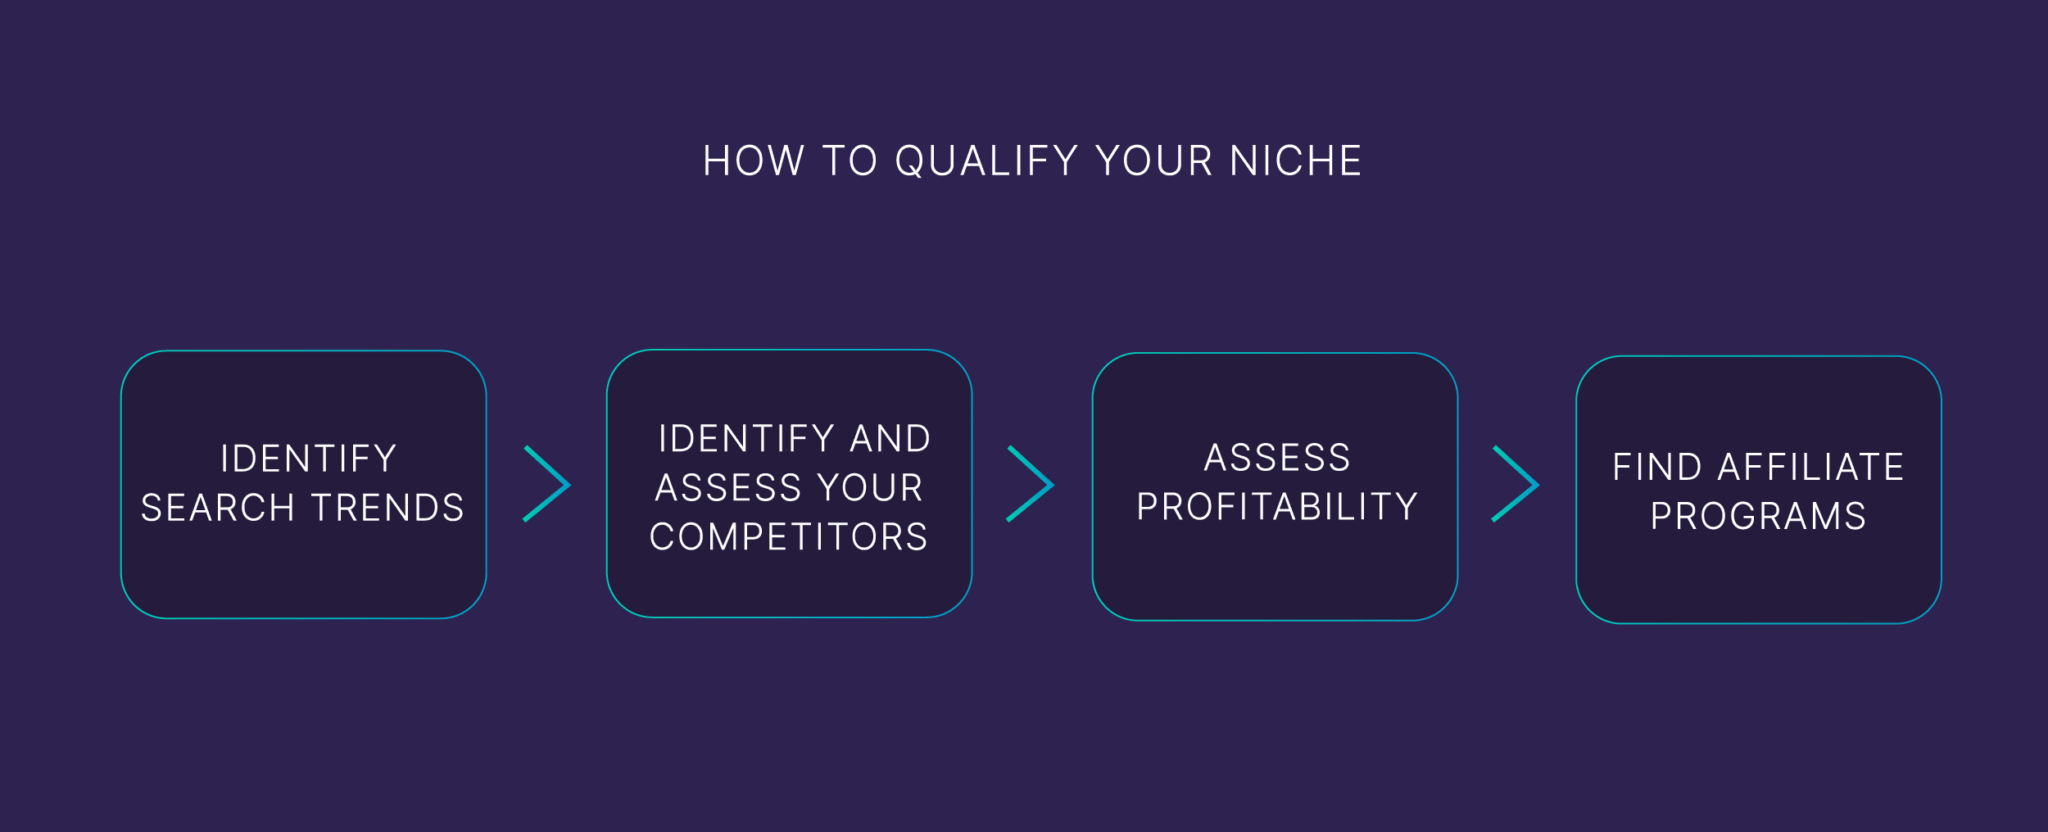 how-to-qualify-your-niche